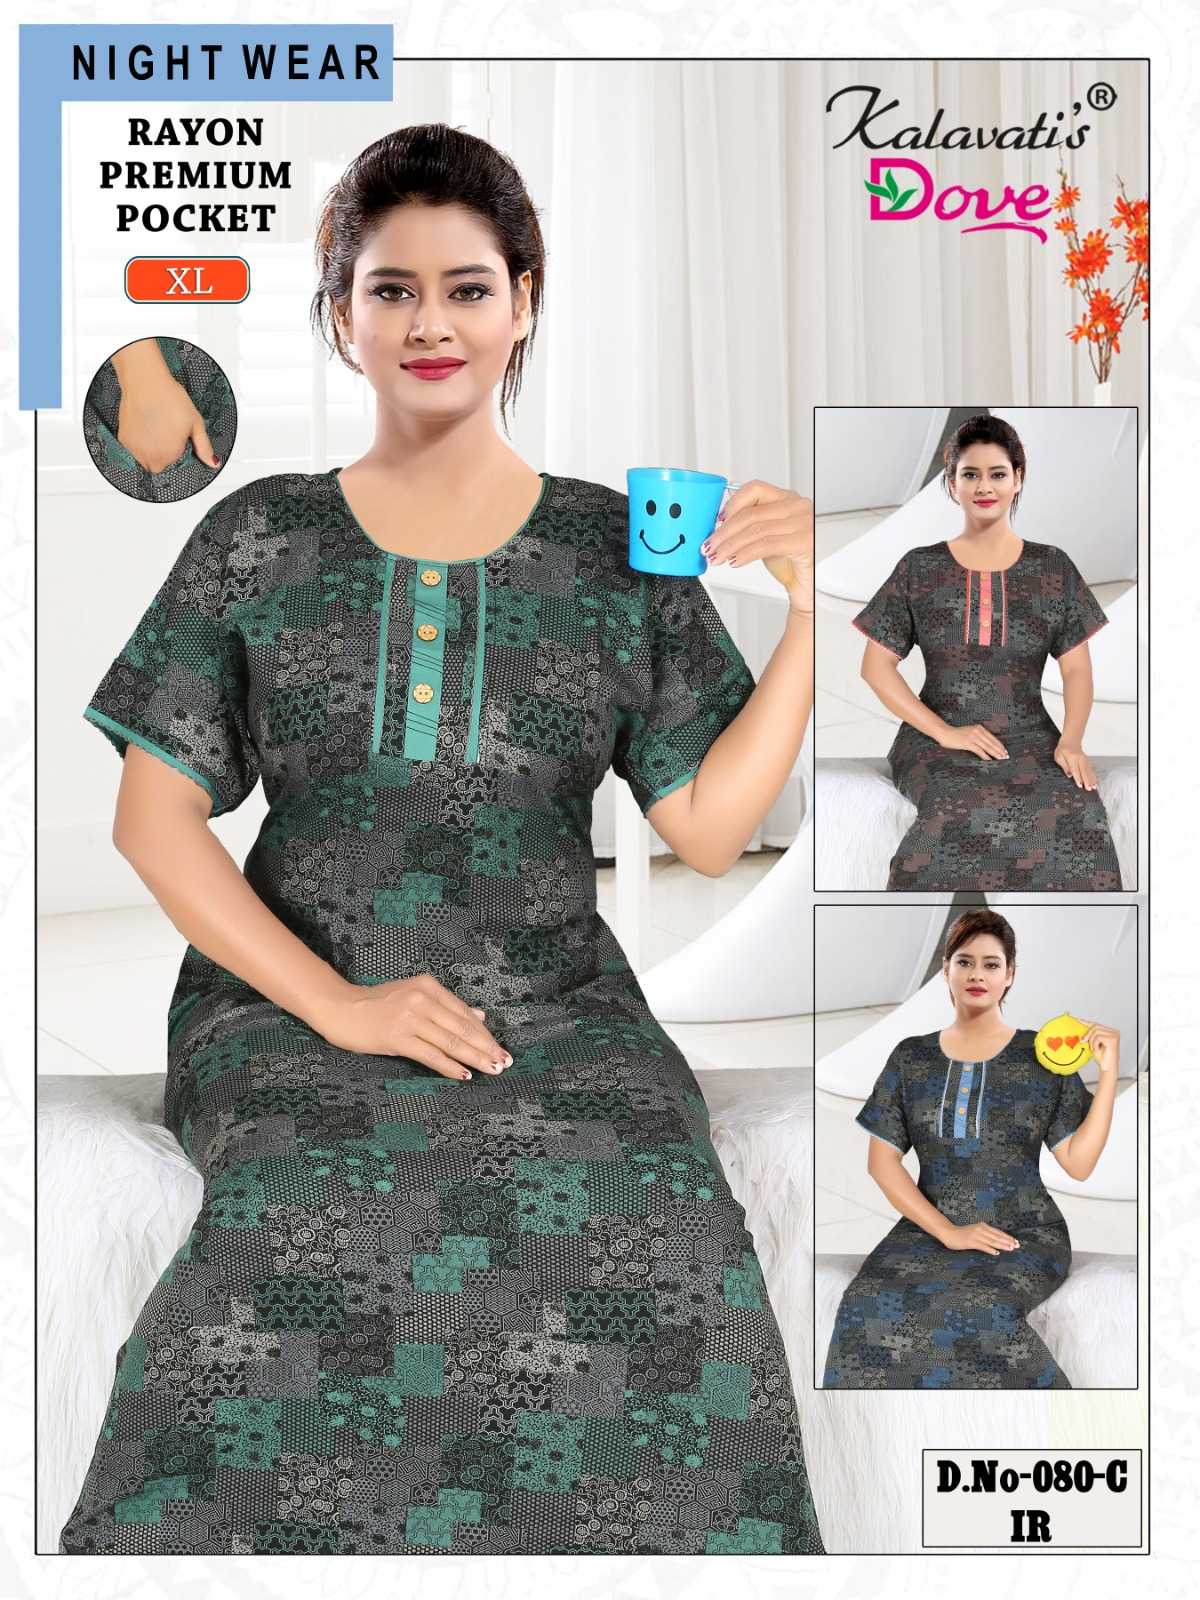 kalavati dove launch fancy daily wear rayon with pocket women nighty collection at best price